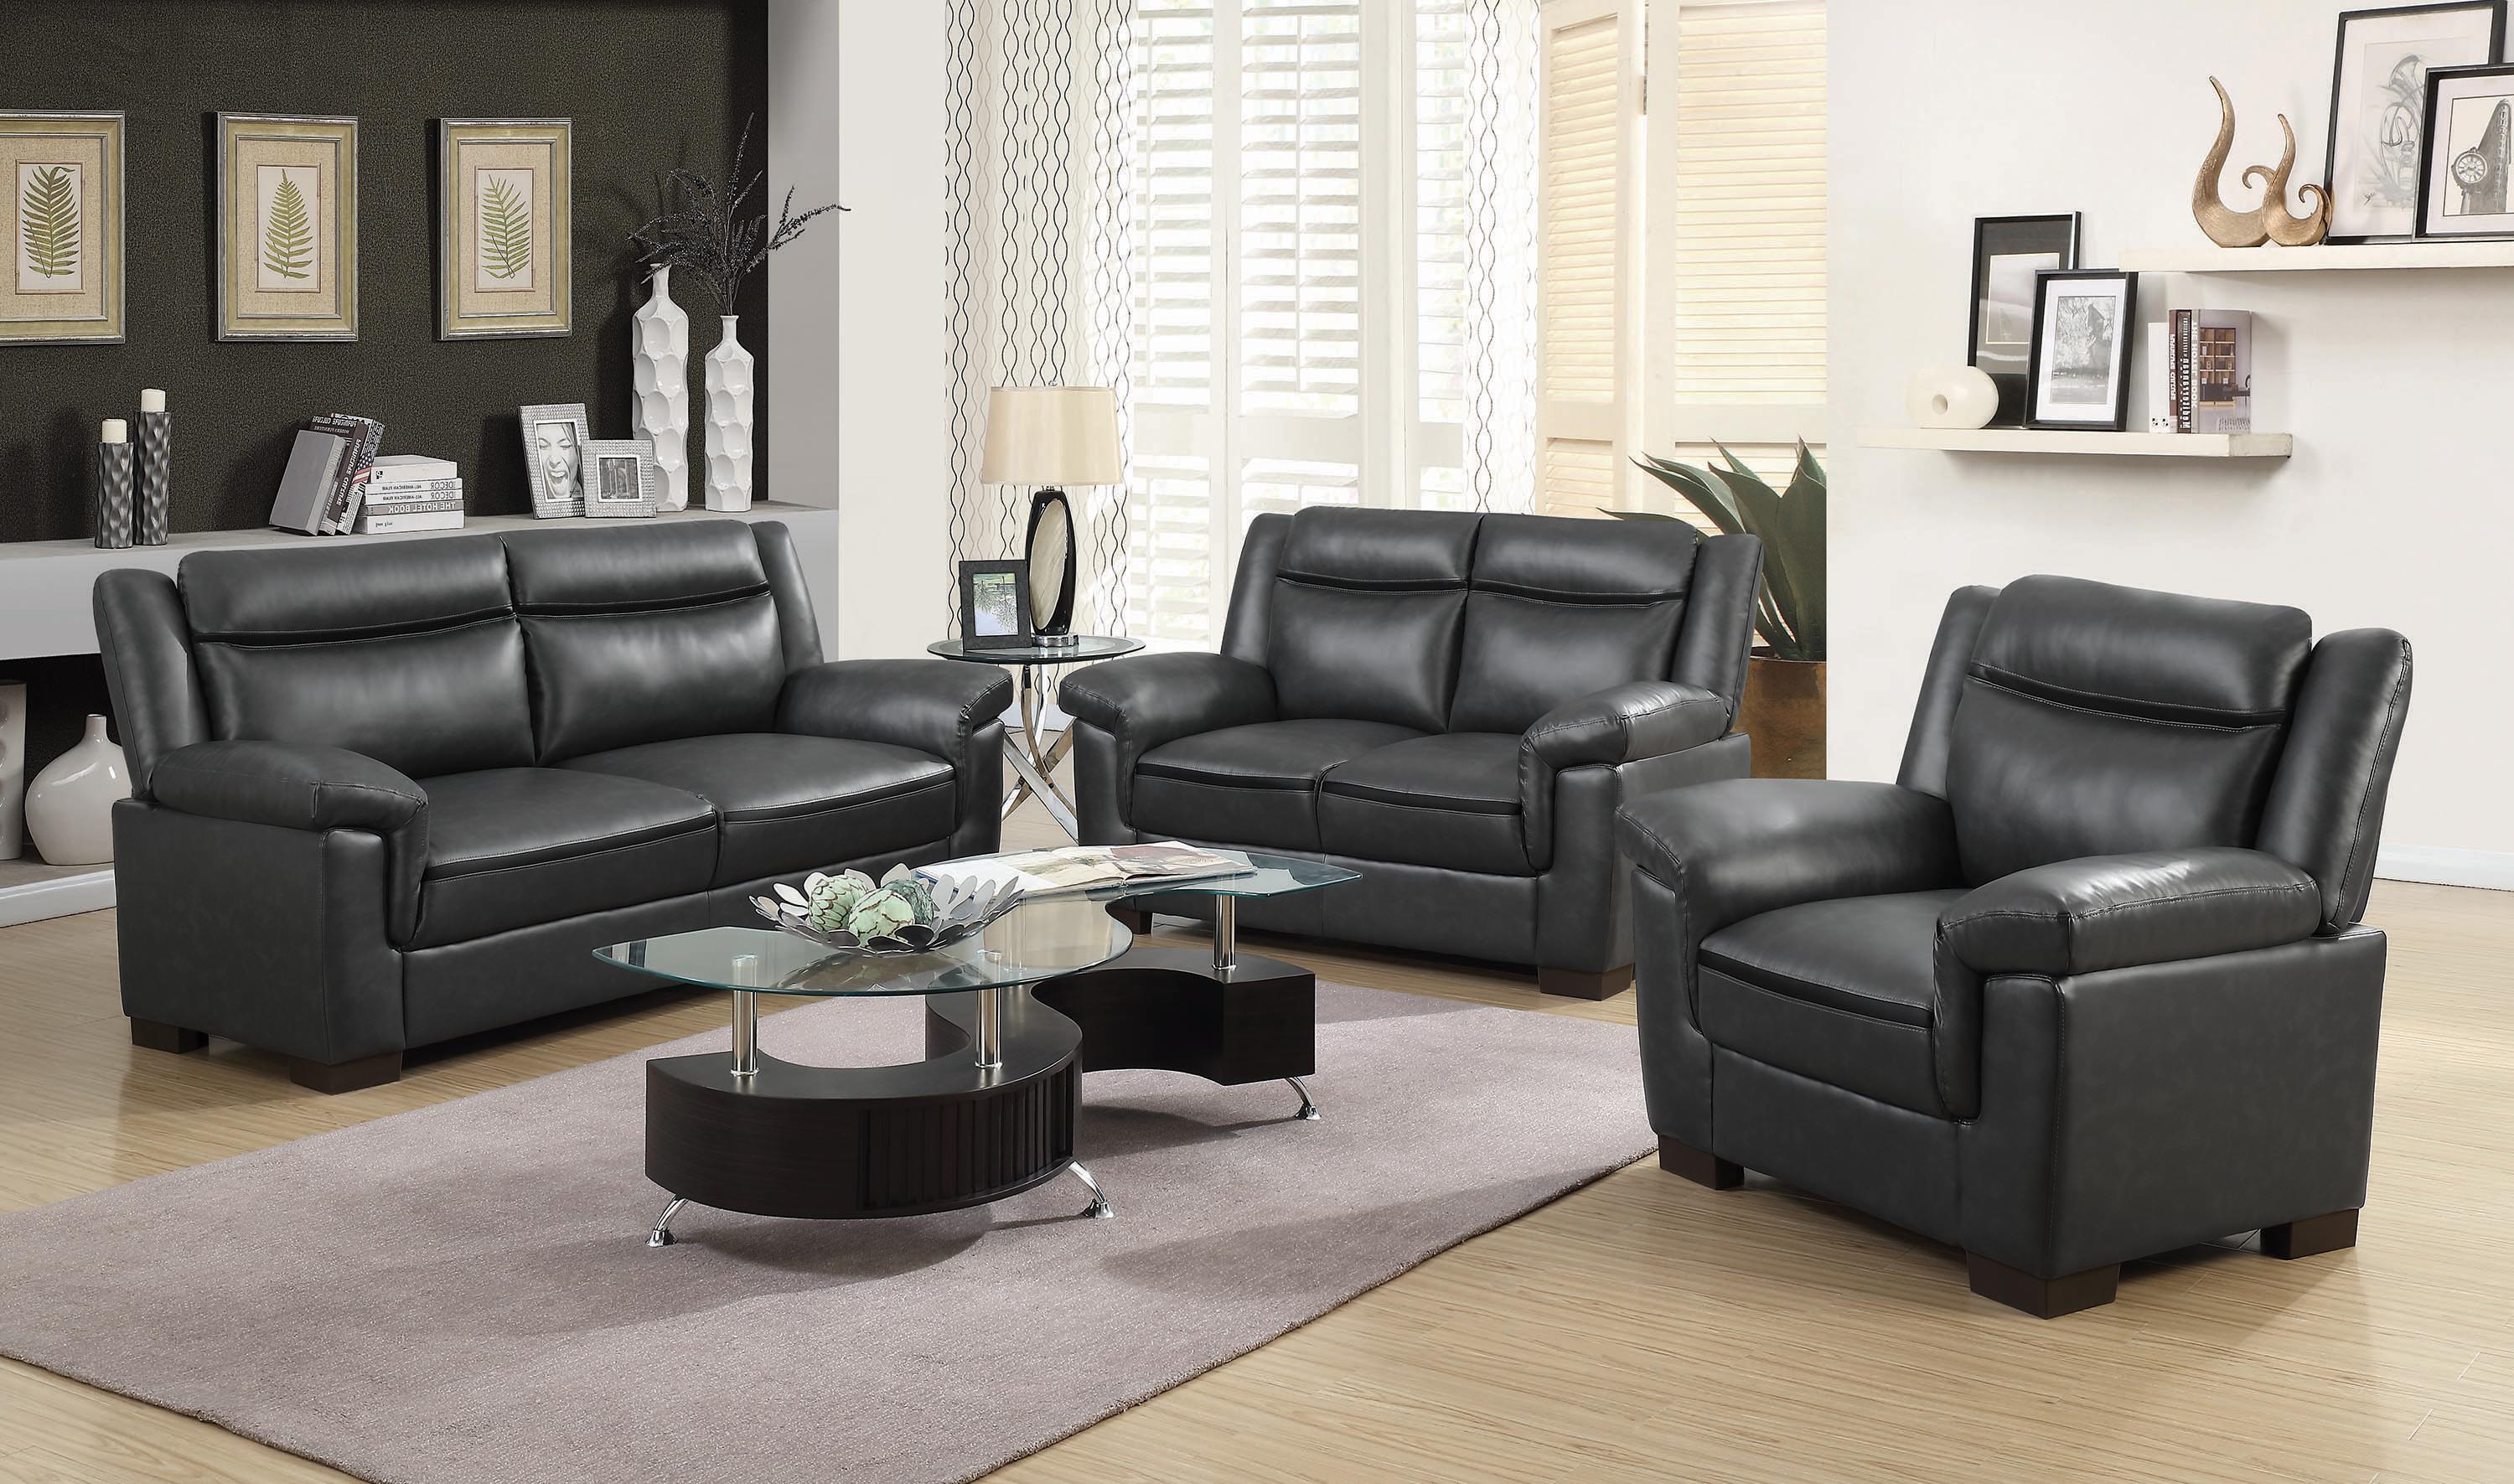 Contemporary Living Room Set 506591-S3 Arabella 506591-S3 in Gray Leatherette